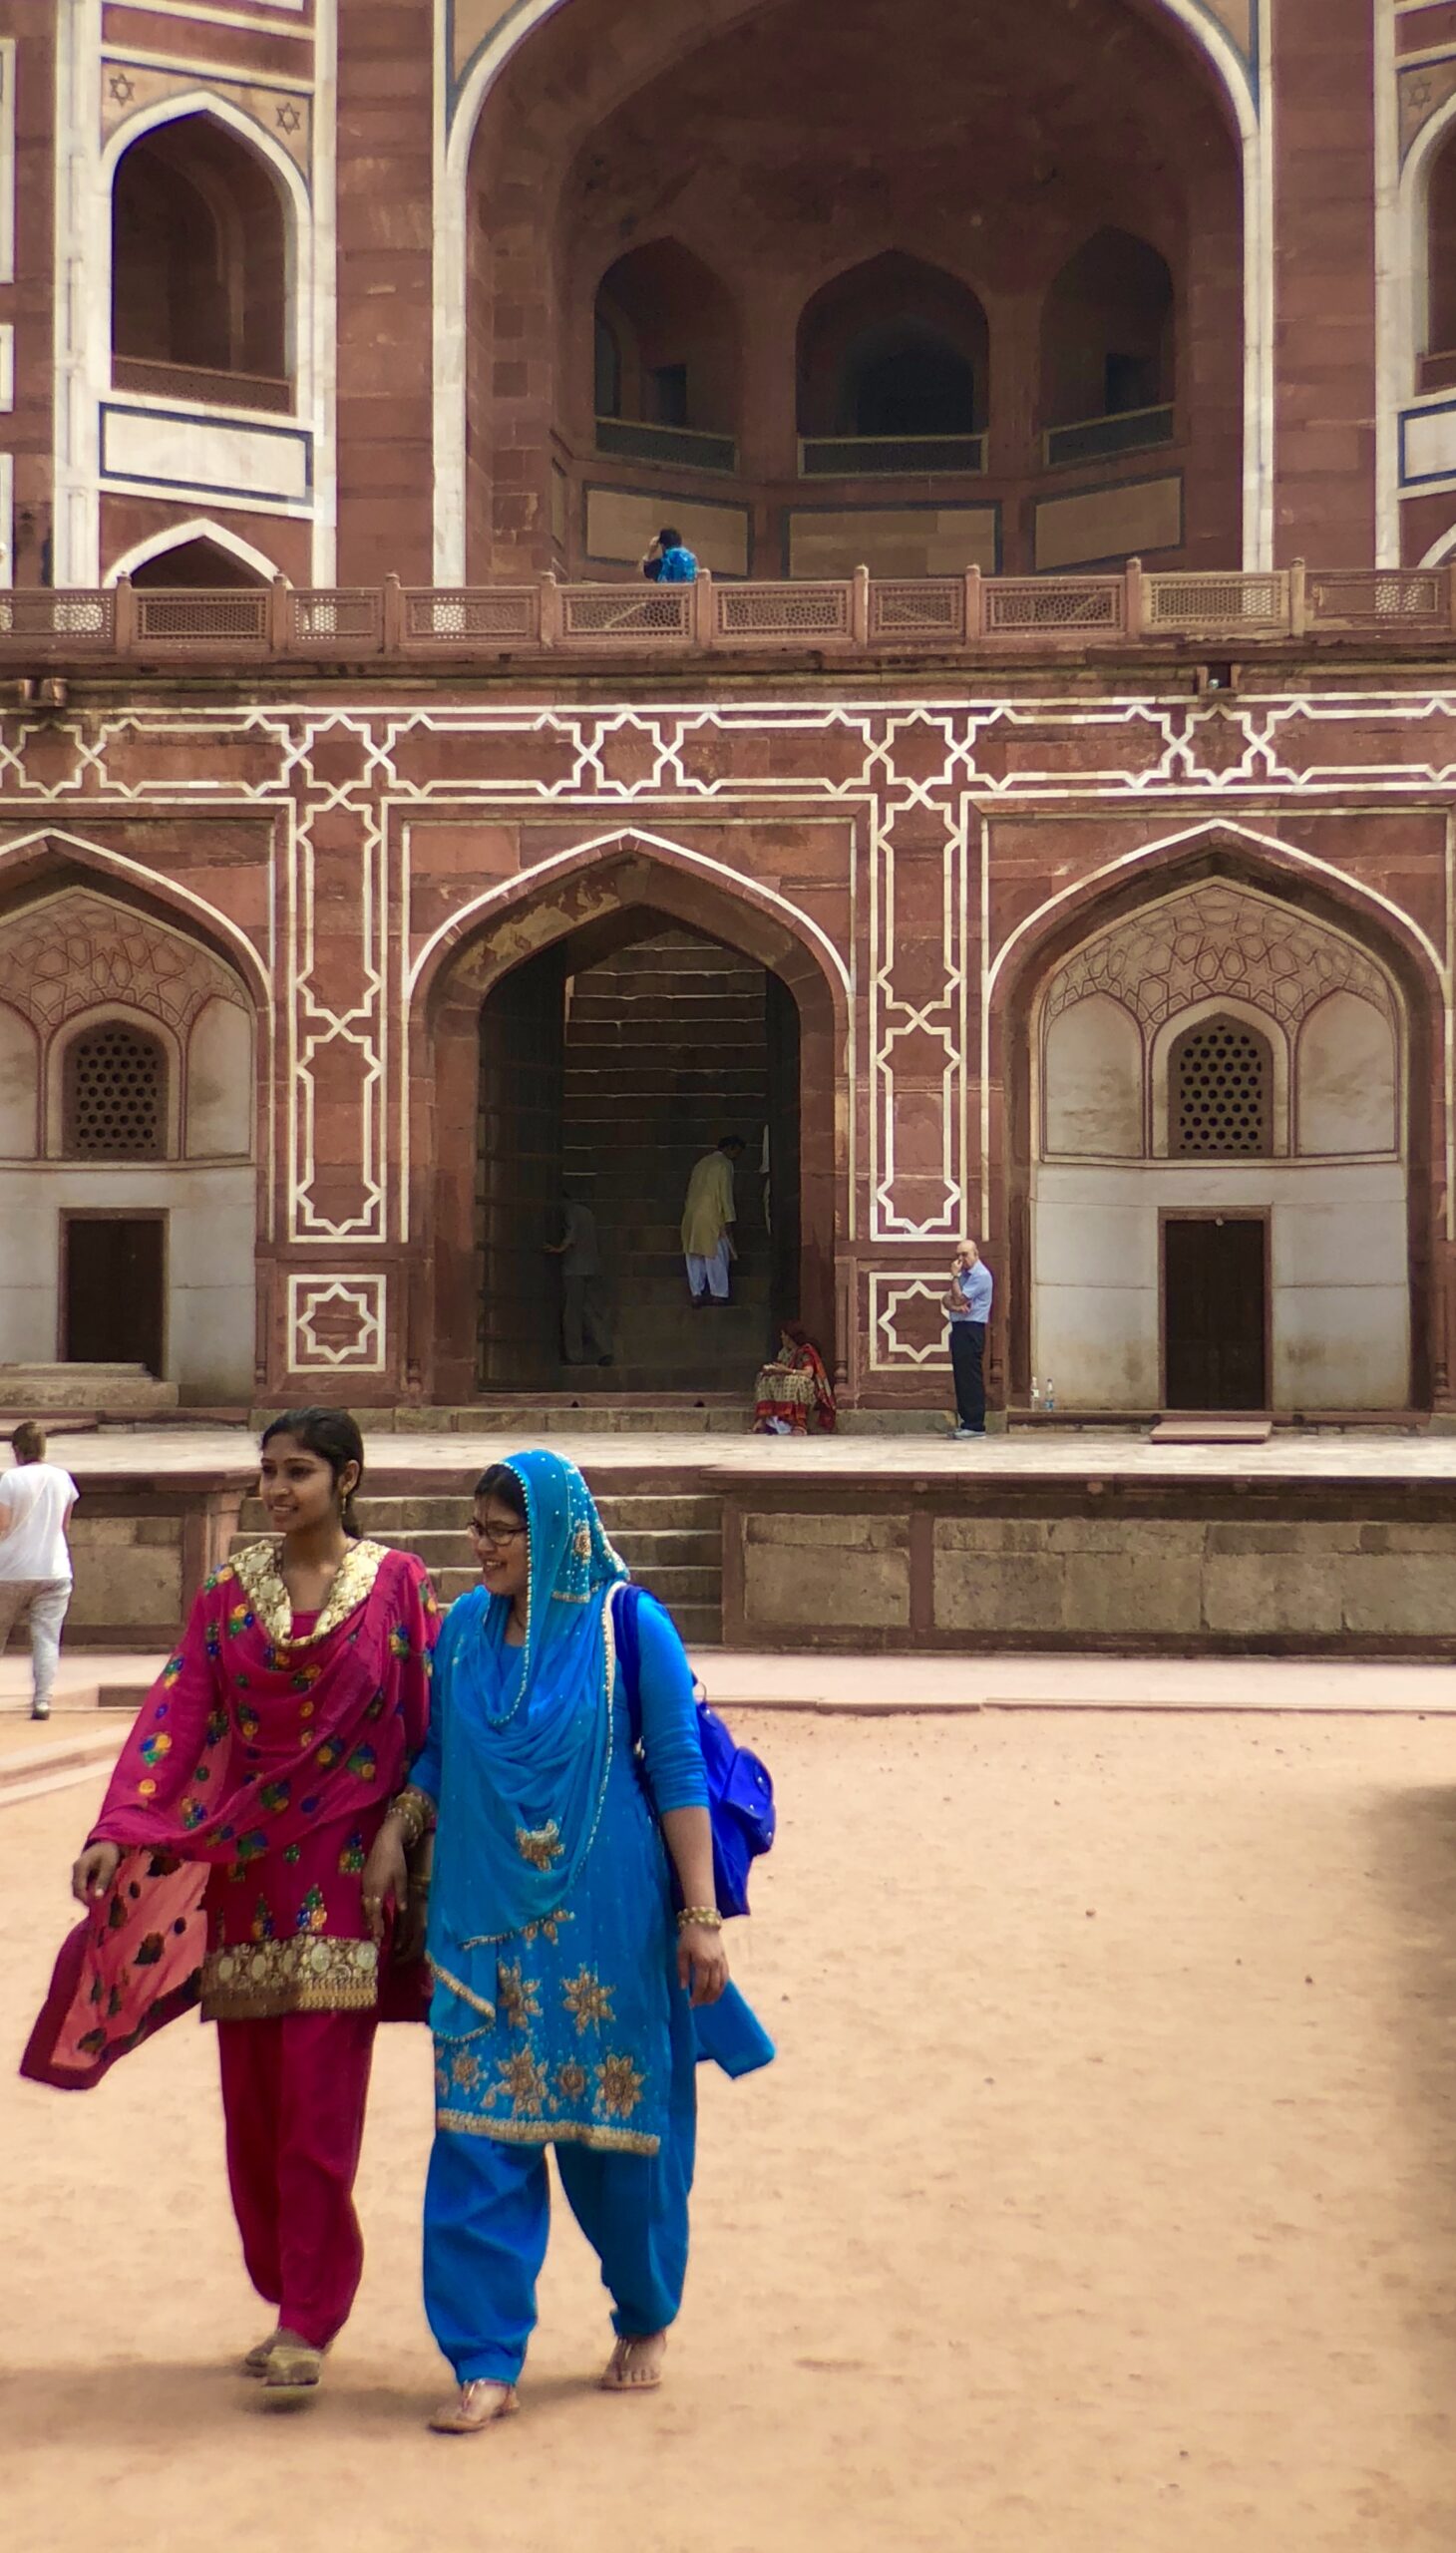 Two women wearing colorful traditional attire walk in front of a historic building with arched doorways and intricate designs. The structure is made of red and white stone. Other visitors can be seen in the background, exploring the site.